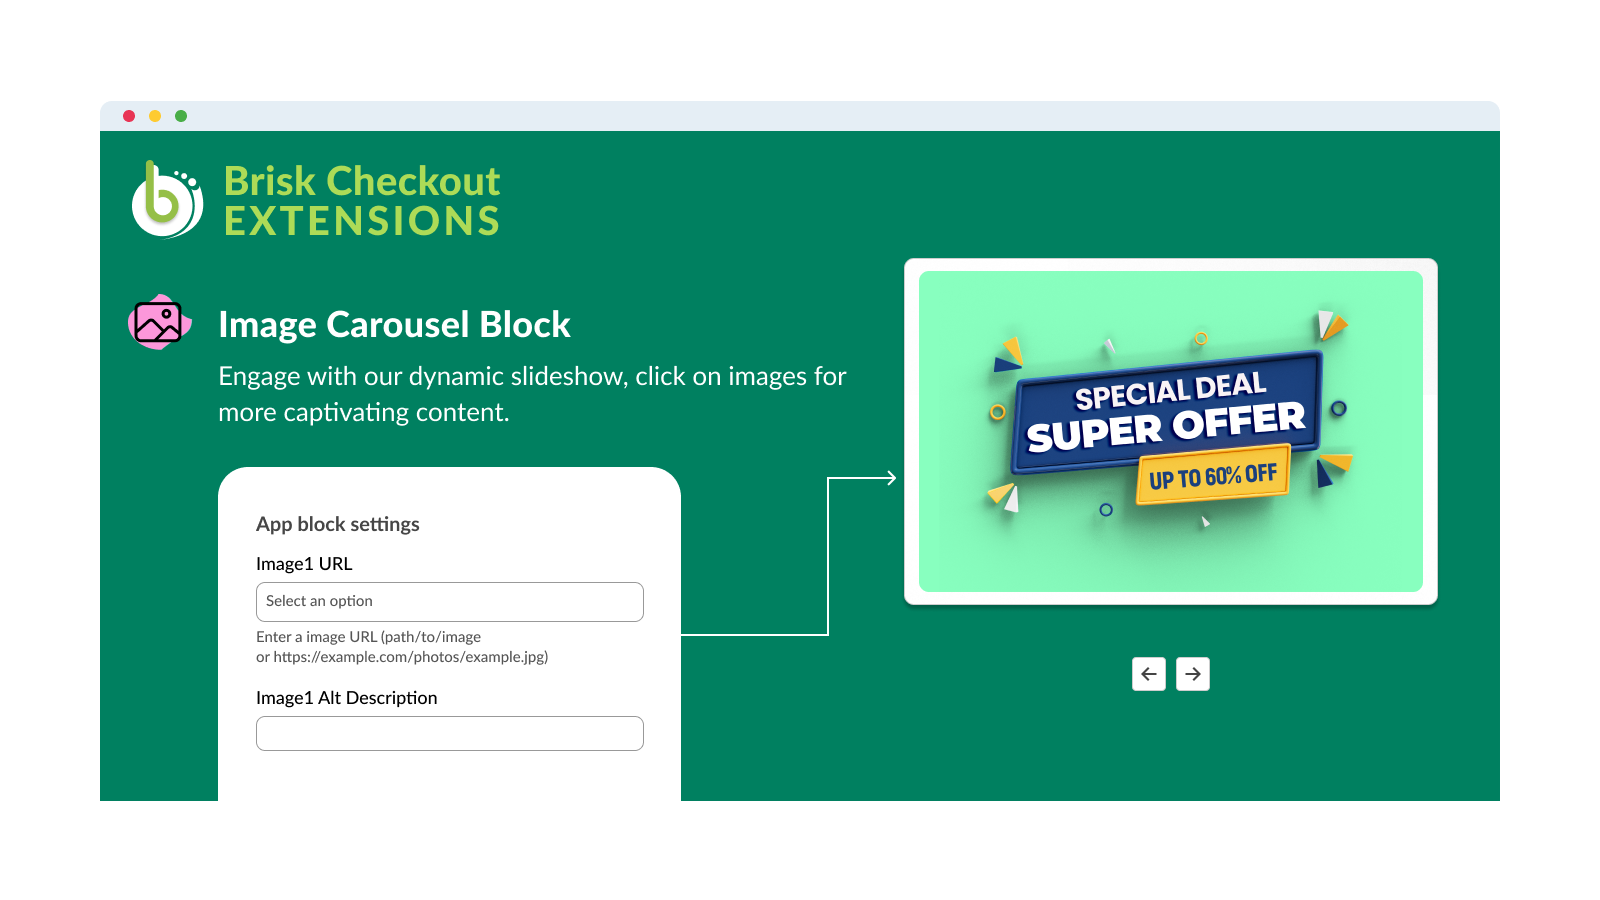 Brisk Checkout Extensions - Image Carousel Block